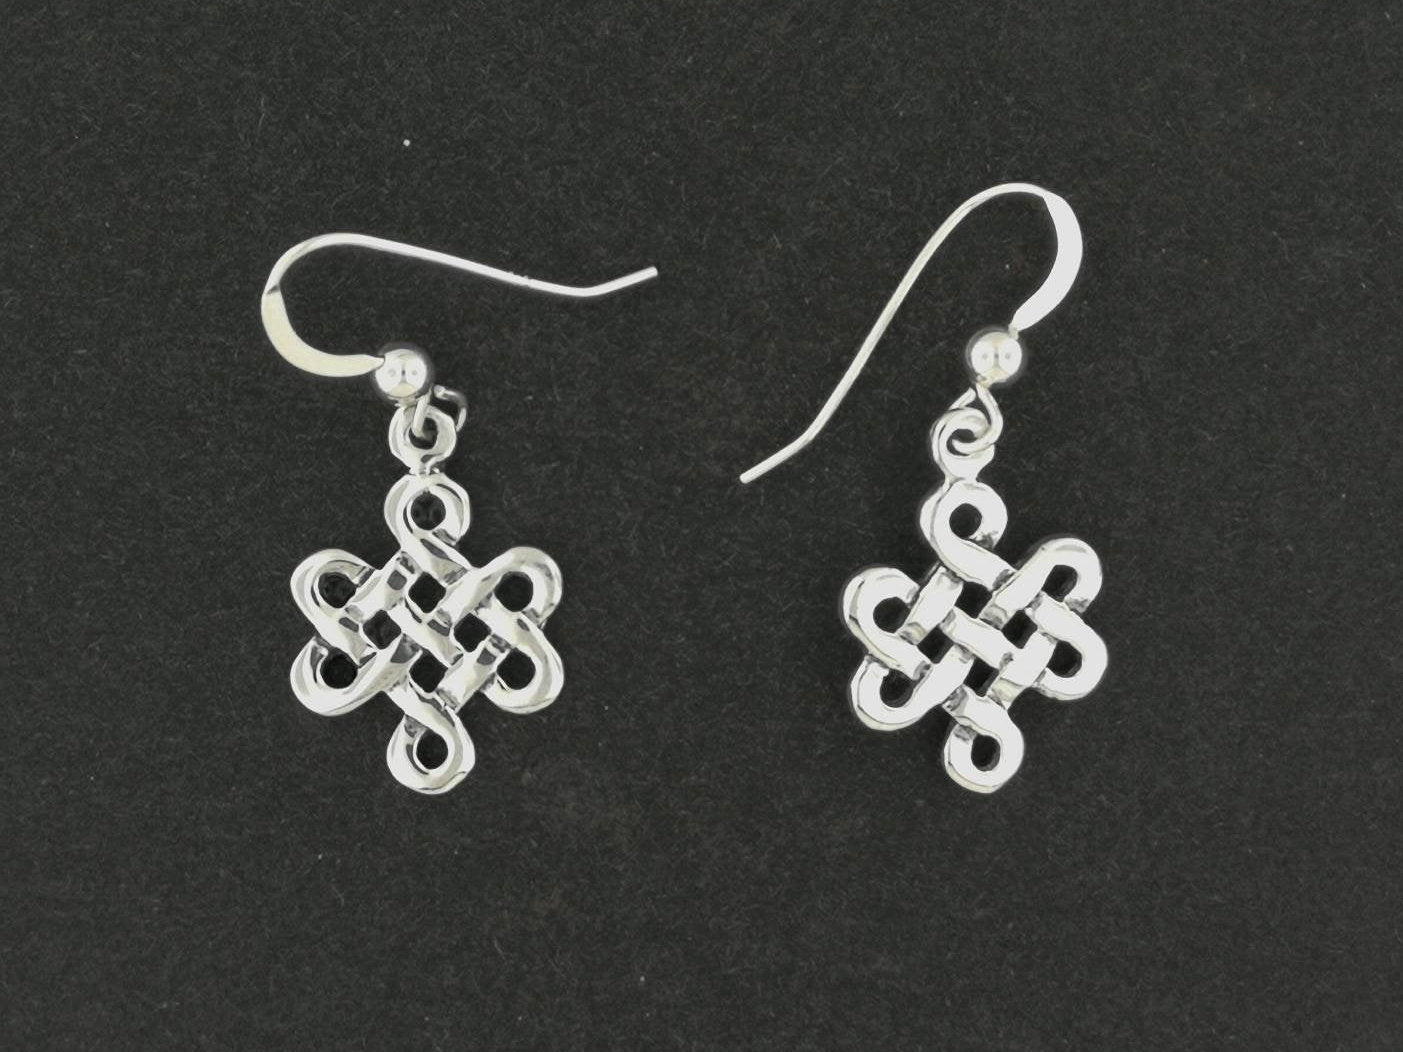 Small Endless Knot Earrings in Sterling Silver or Antique Bronze